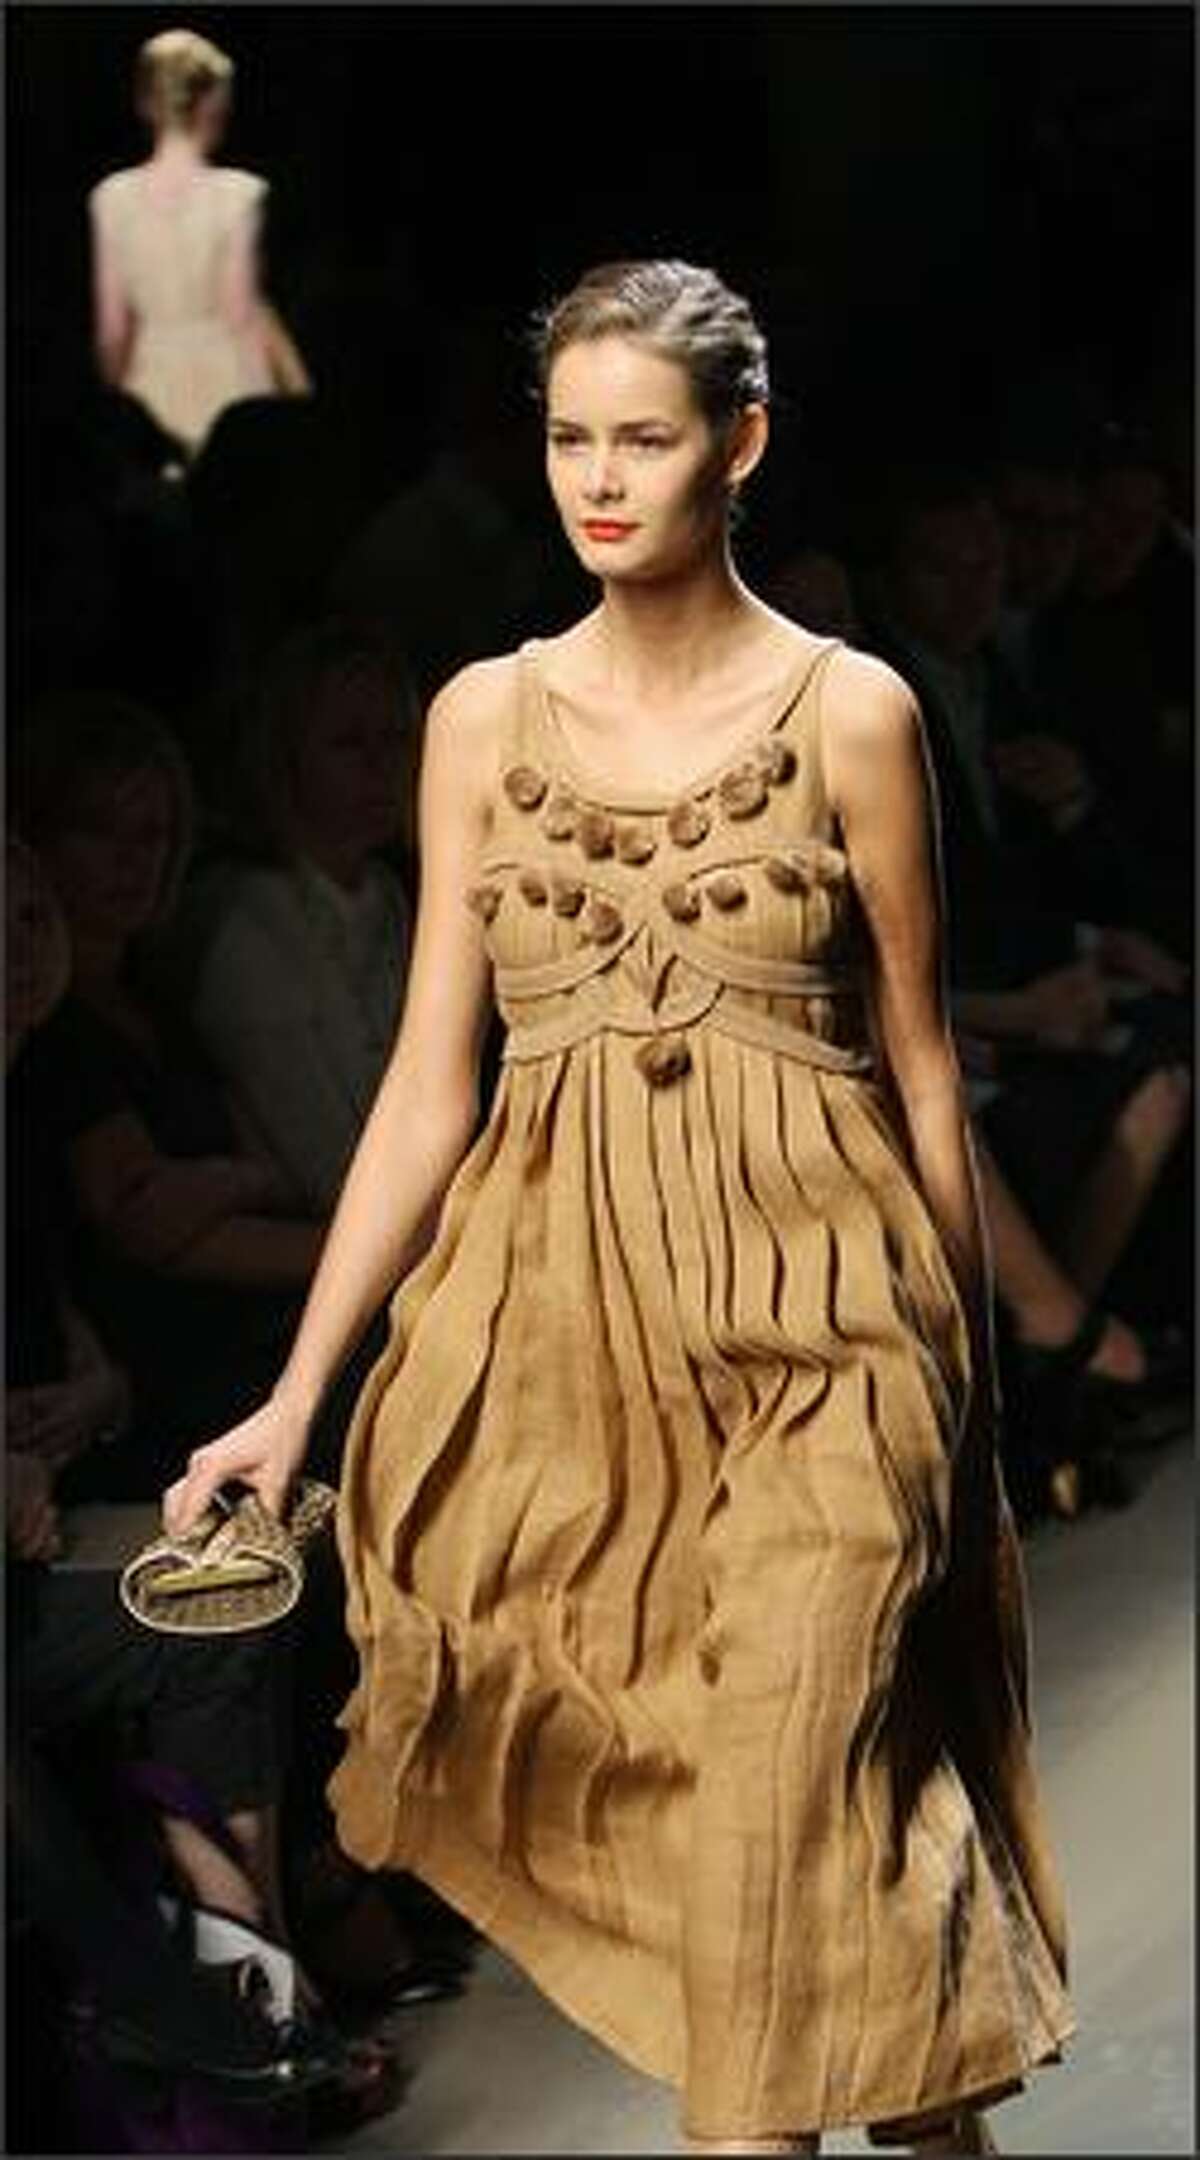 A model presents a creation by German designer Tomas Maier for Bottega Veneta during the spring/summer 2008 collections of the Milan ready-to-wear fashion shows.